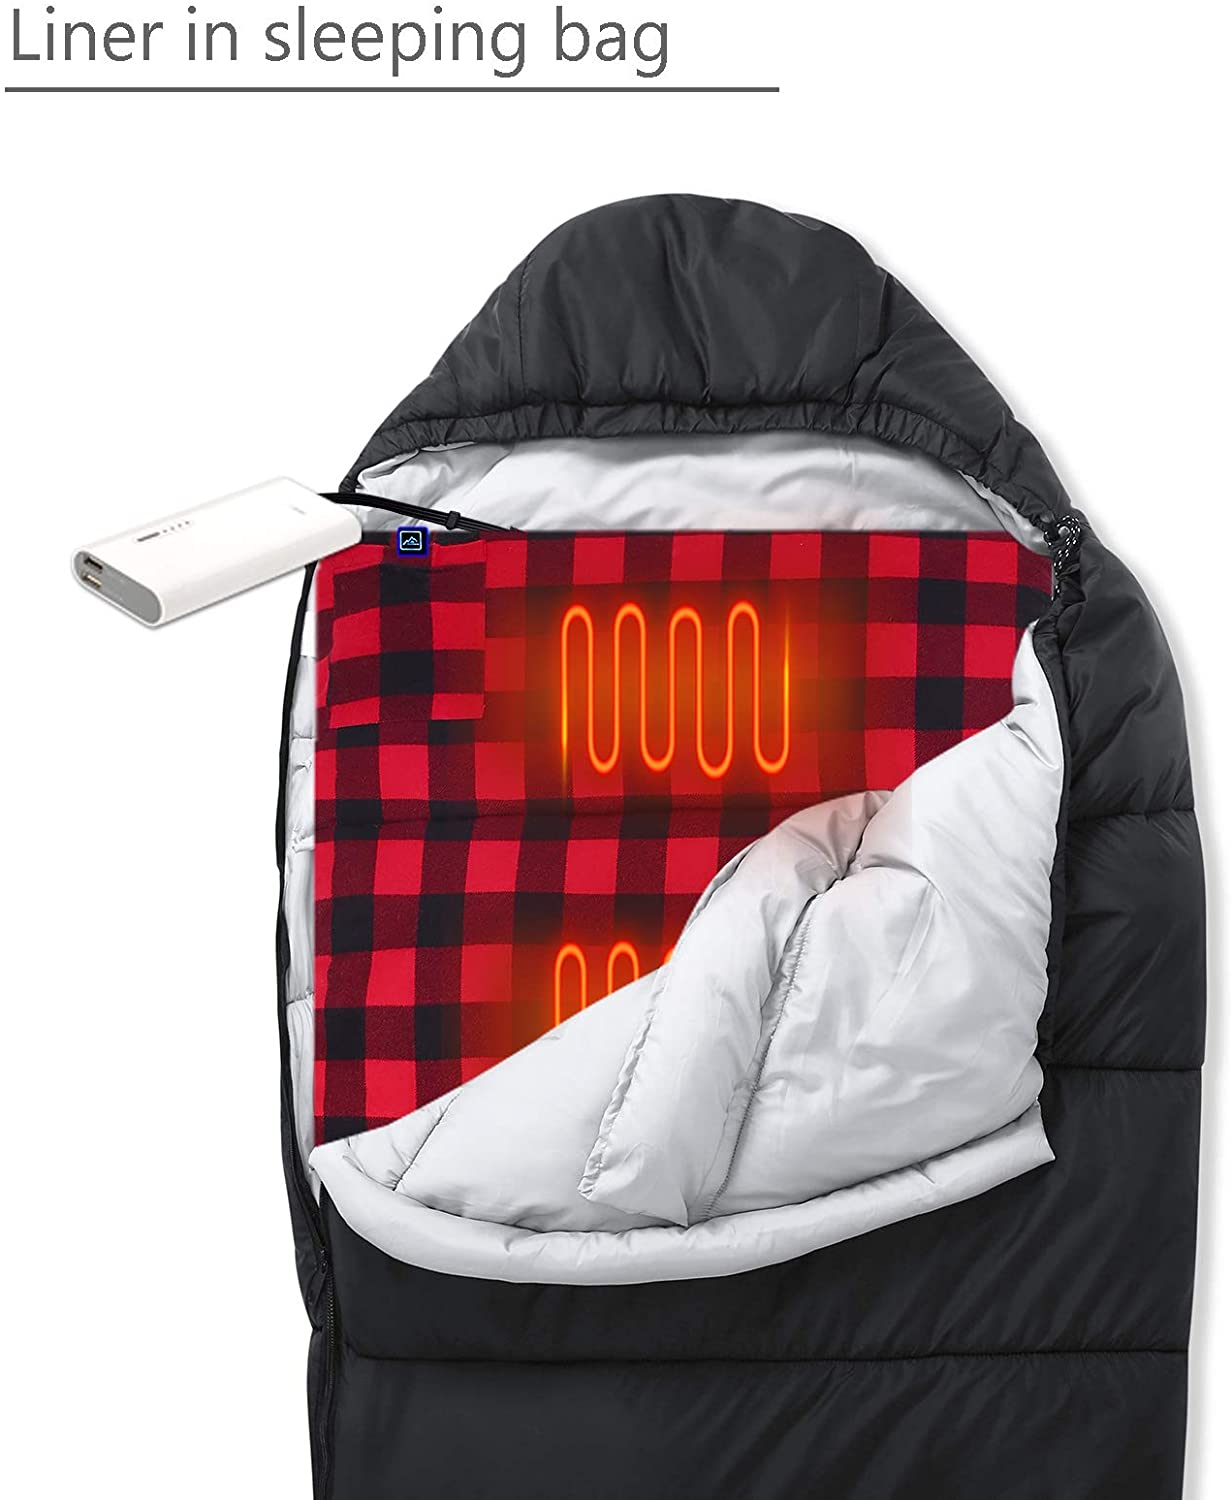 Mantuole Heated Sleeping Bag Liner, Heated seat Cushion, 5pcs Multi USB Power Support Heating Pads, Operated by Battery Power Bank or Other USB Power Supply, Compact Bag Included.